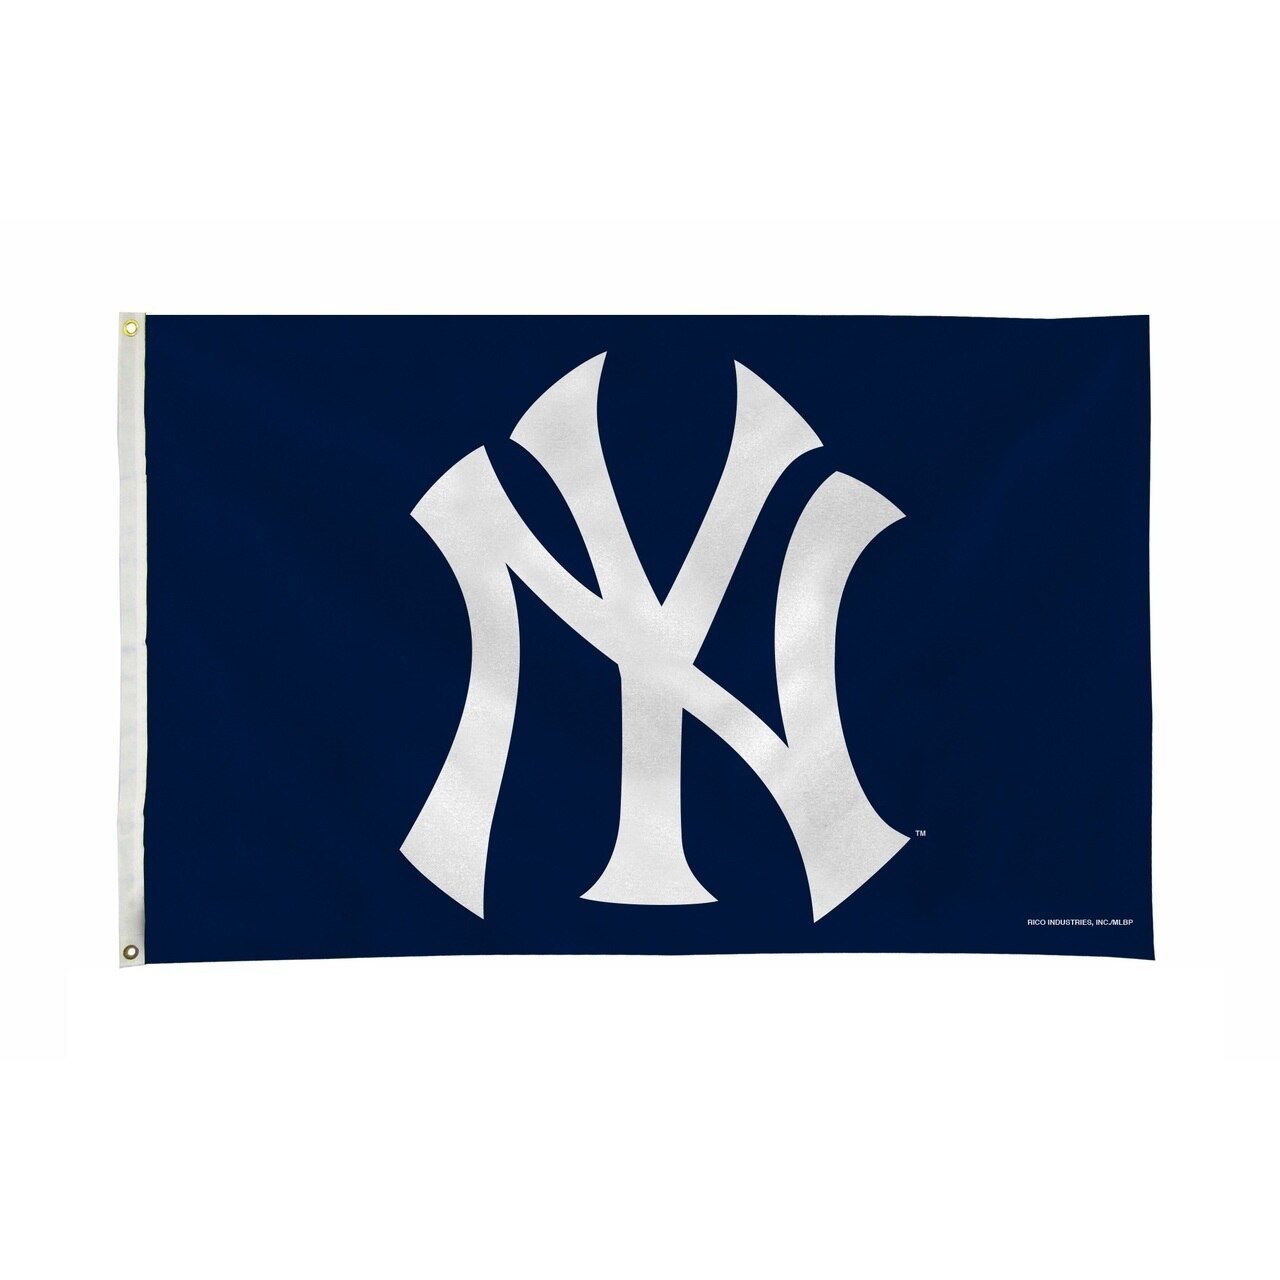 New York Yankees Officially Become Baseball's Evil Empire - The